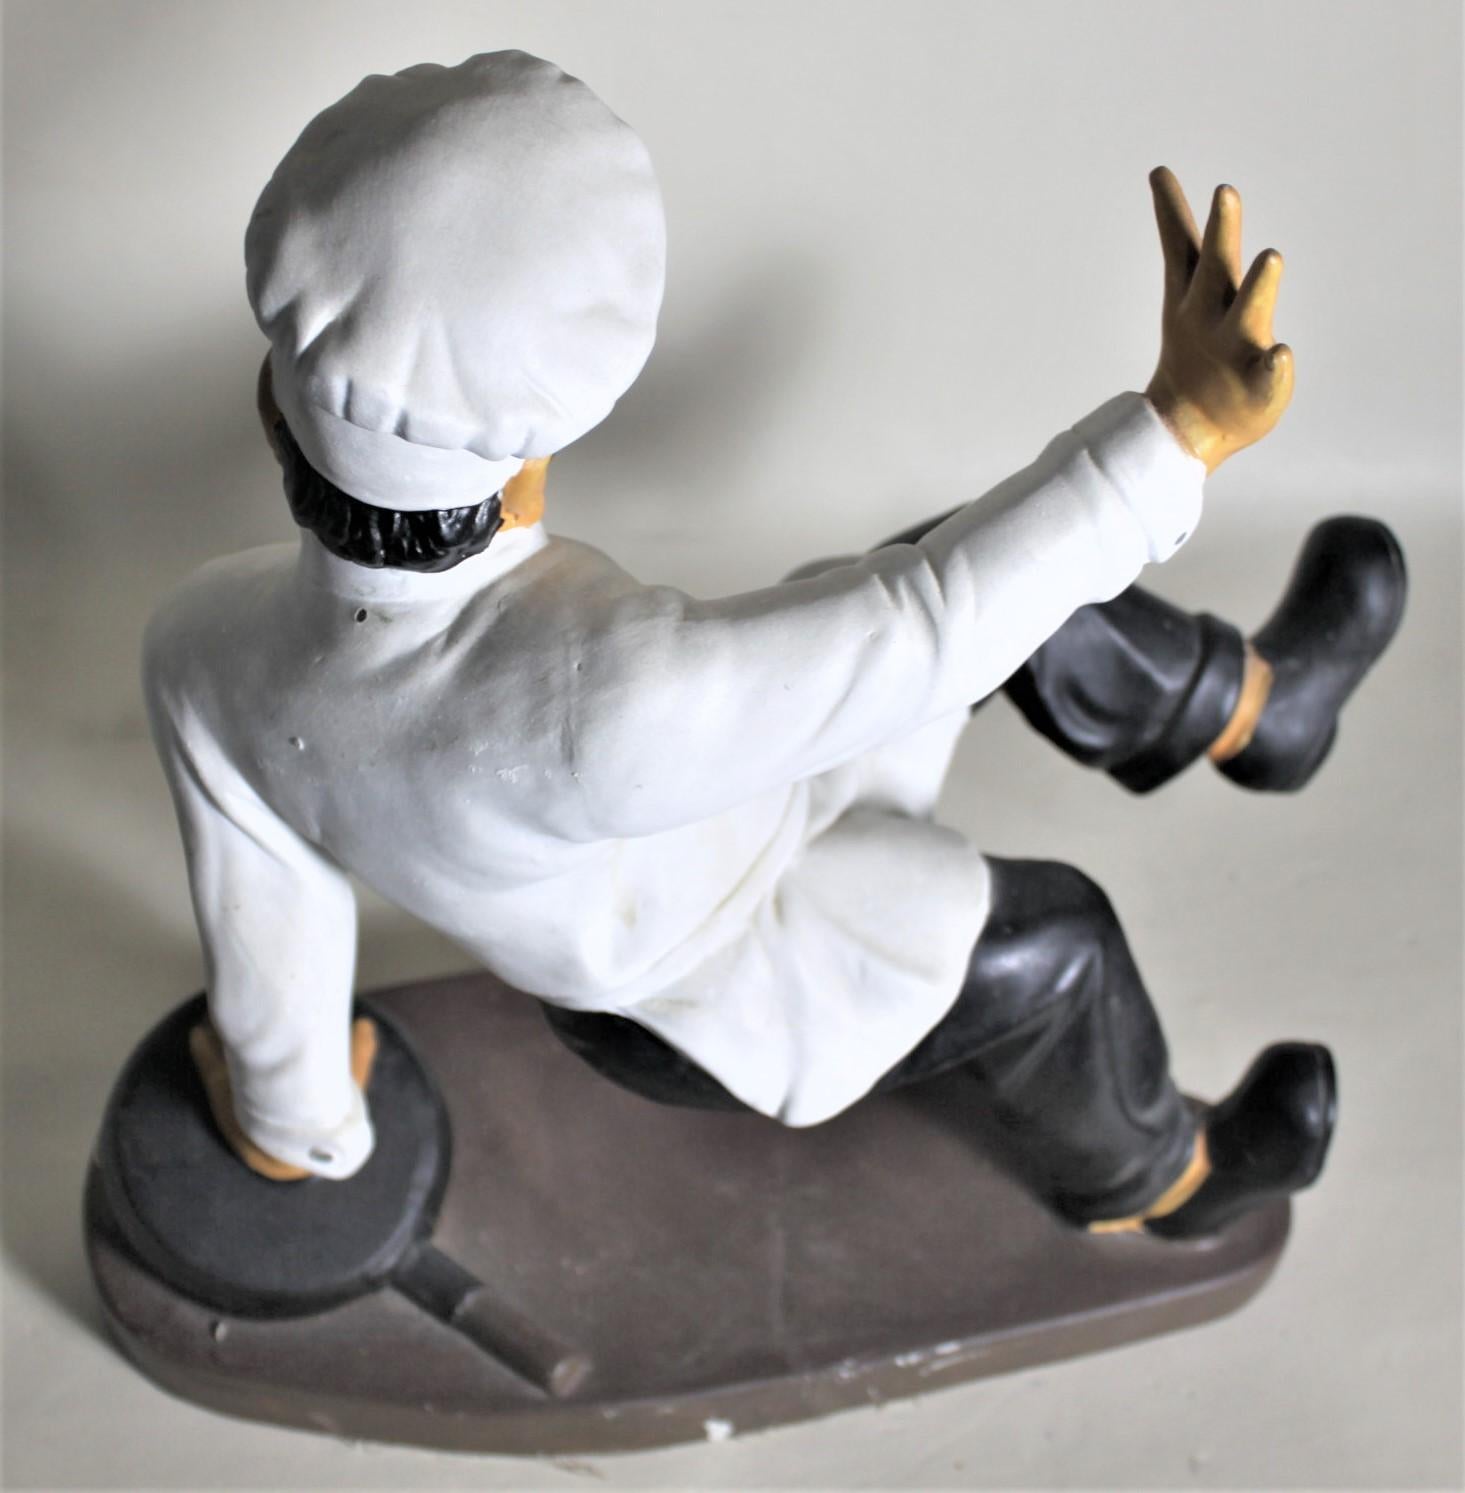 Vintage Whimsical Chalkware French or Italian Falling Chef Figurine or Sculpture In Good Condition For Sale In Hamilton, Ontario